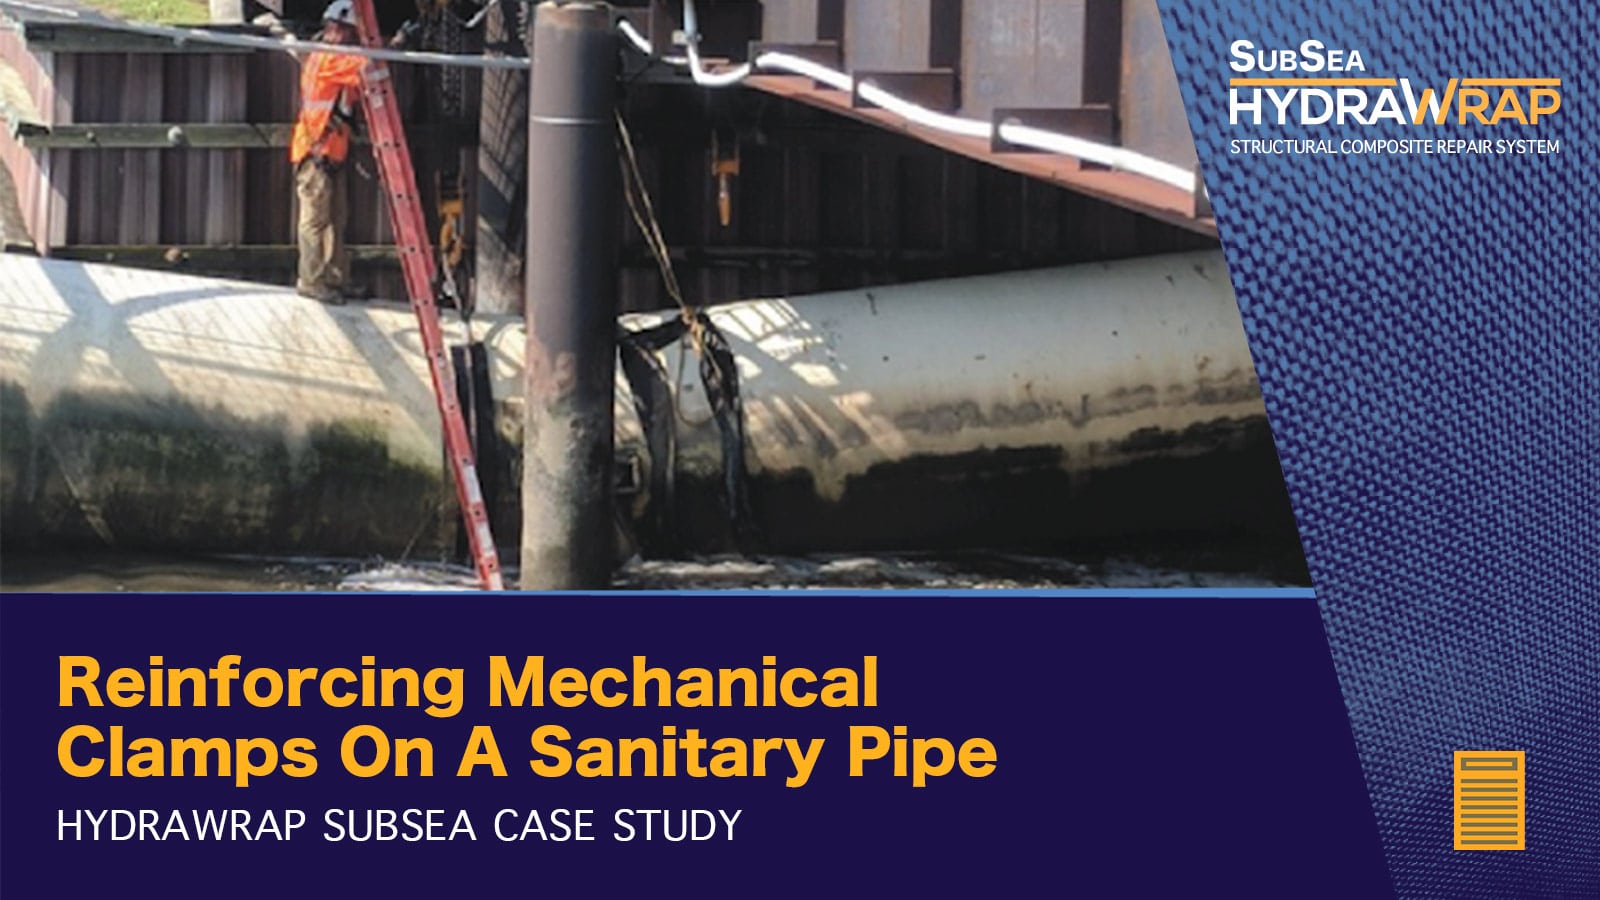 Sanitary Pipe being repaired, 'Reinforcing Mechanical Clamps On A Sanitary Pipe, HydraWrap SubSea Case Study'